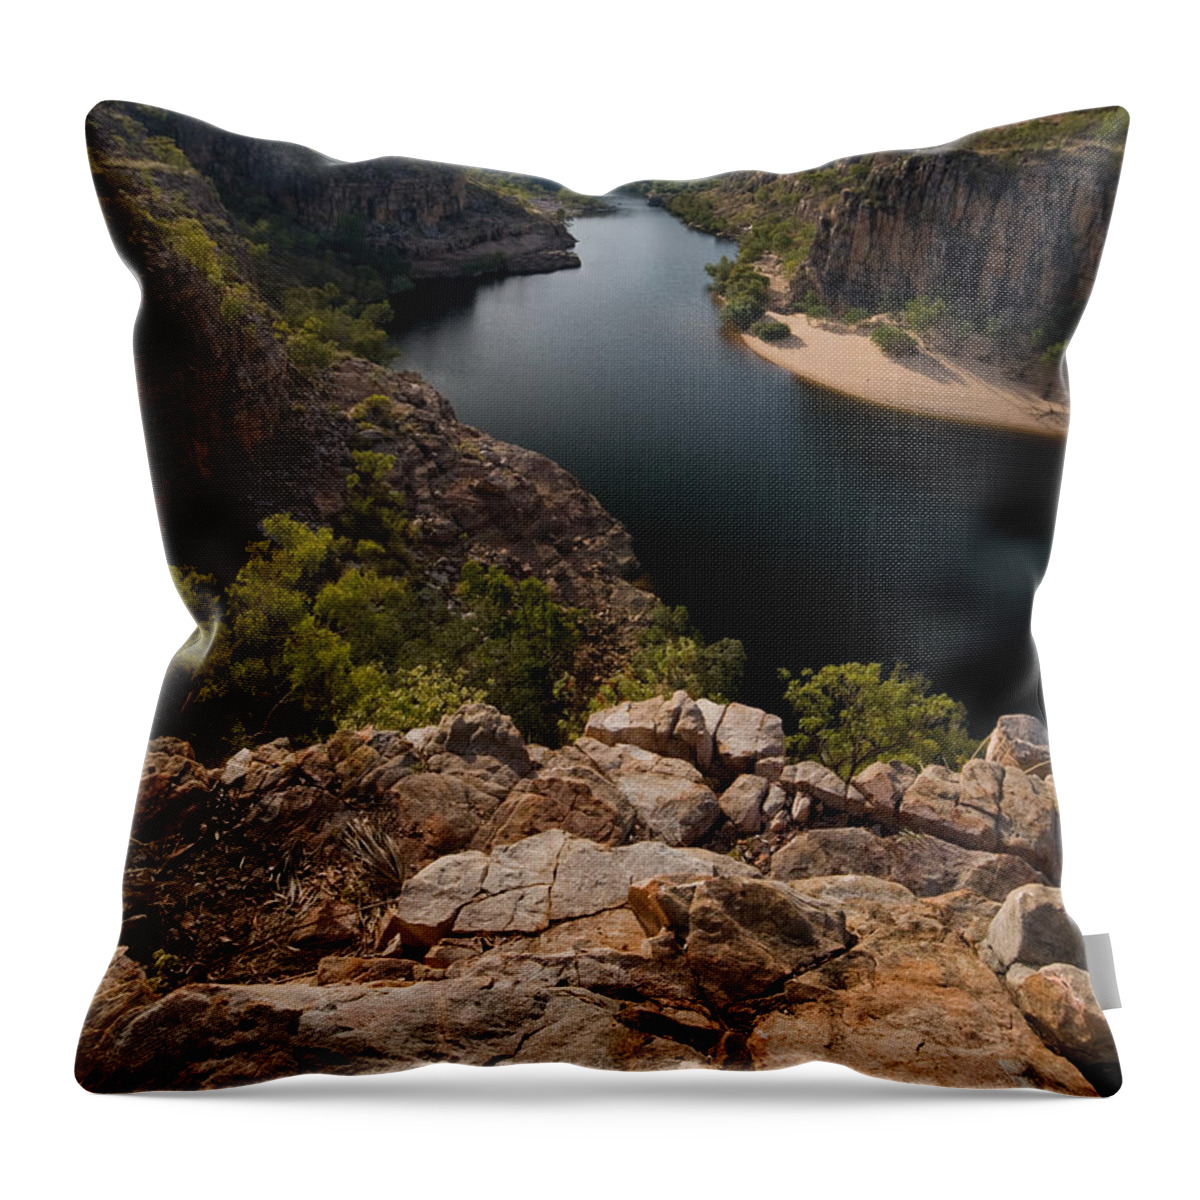 Scenics Throw Pillow featuring the photograph Katherine Gorge by Samvaltenbergs